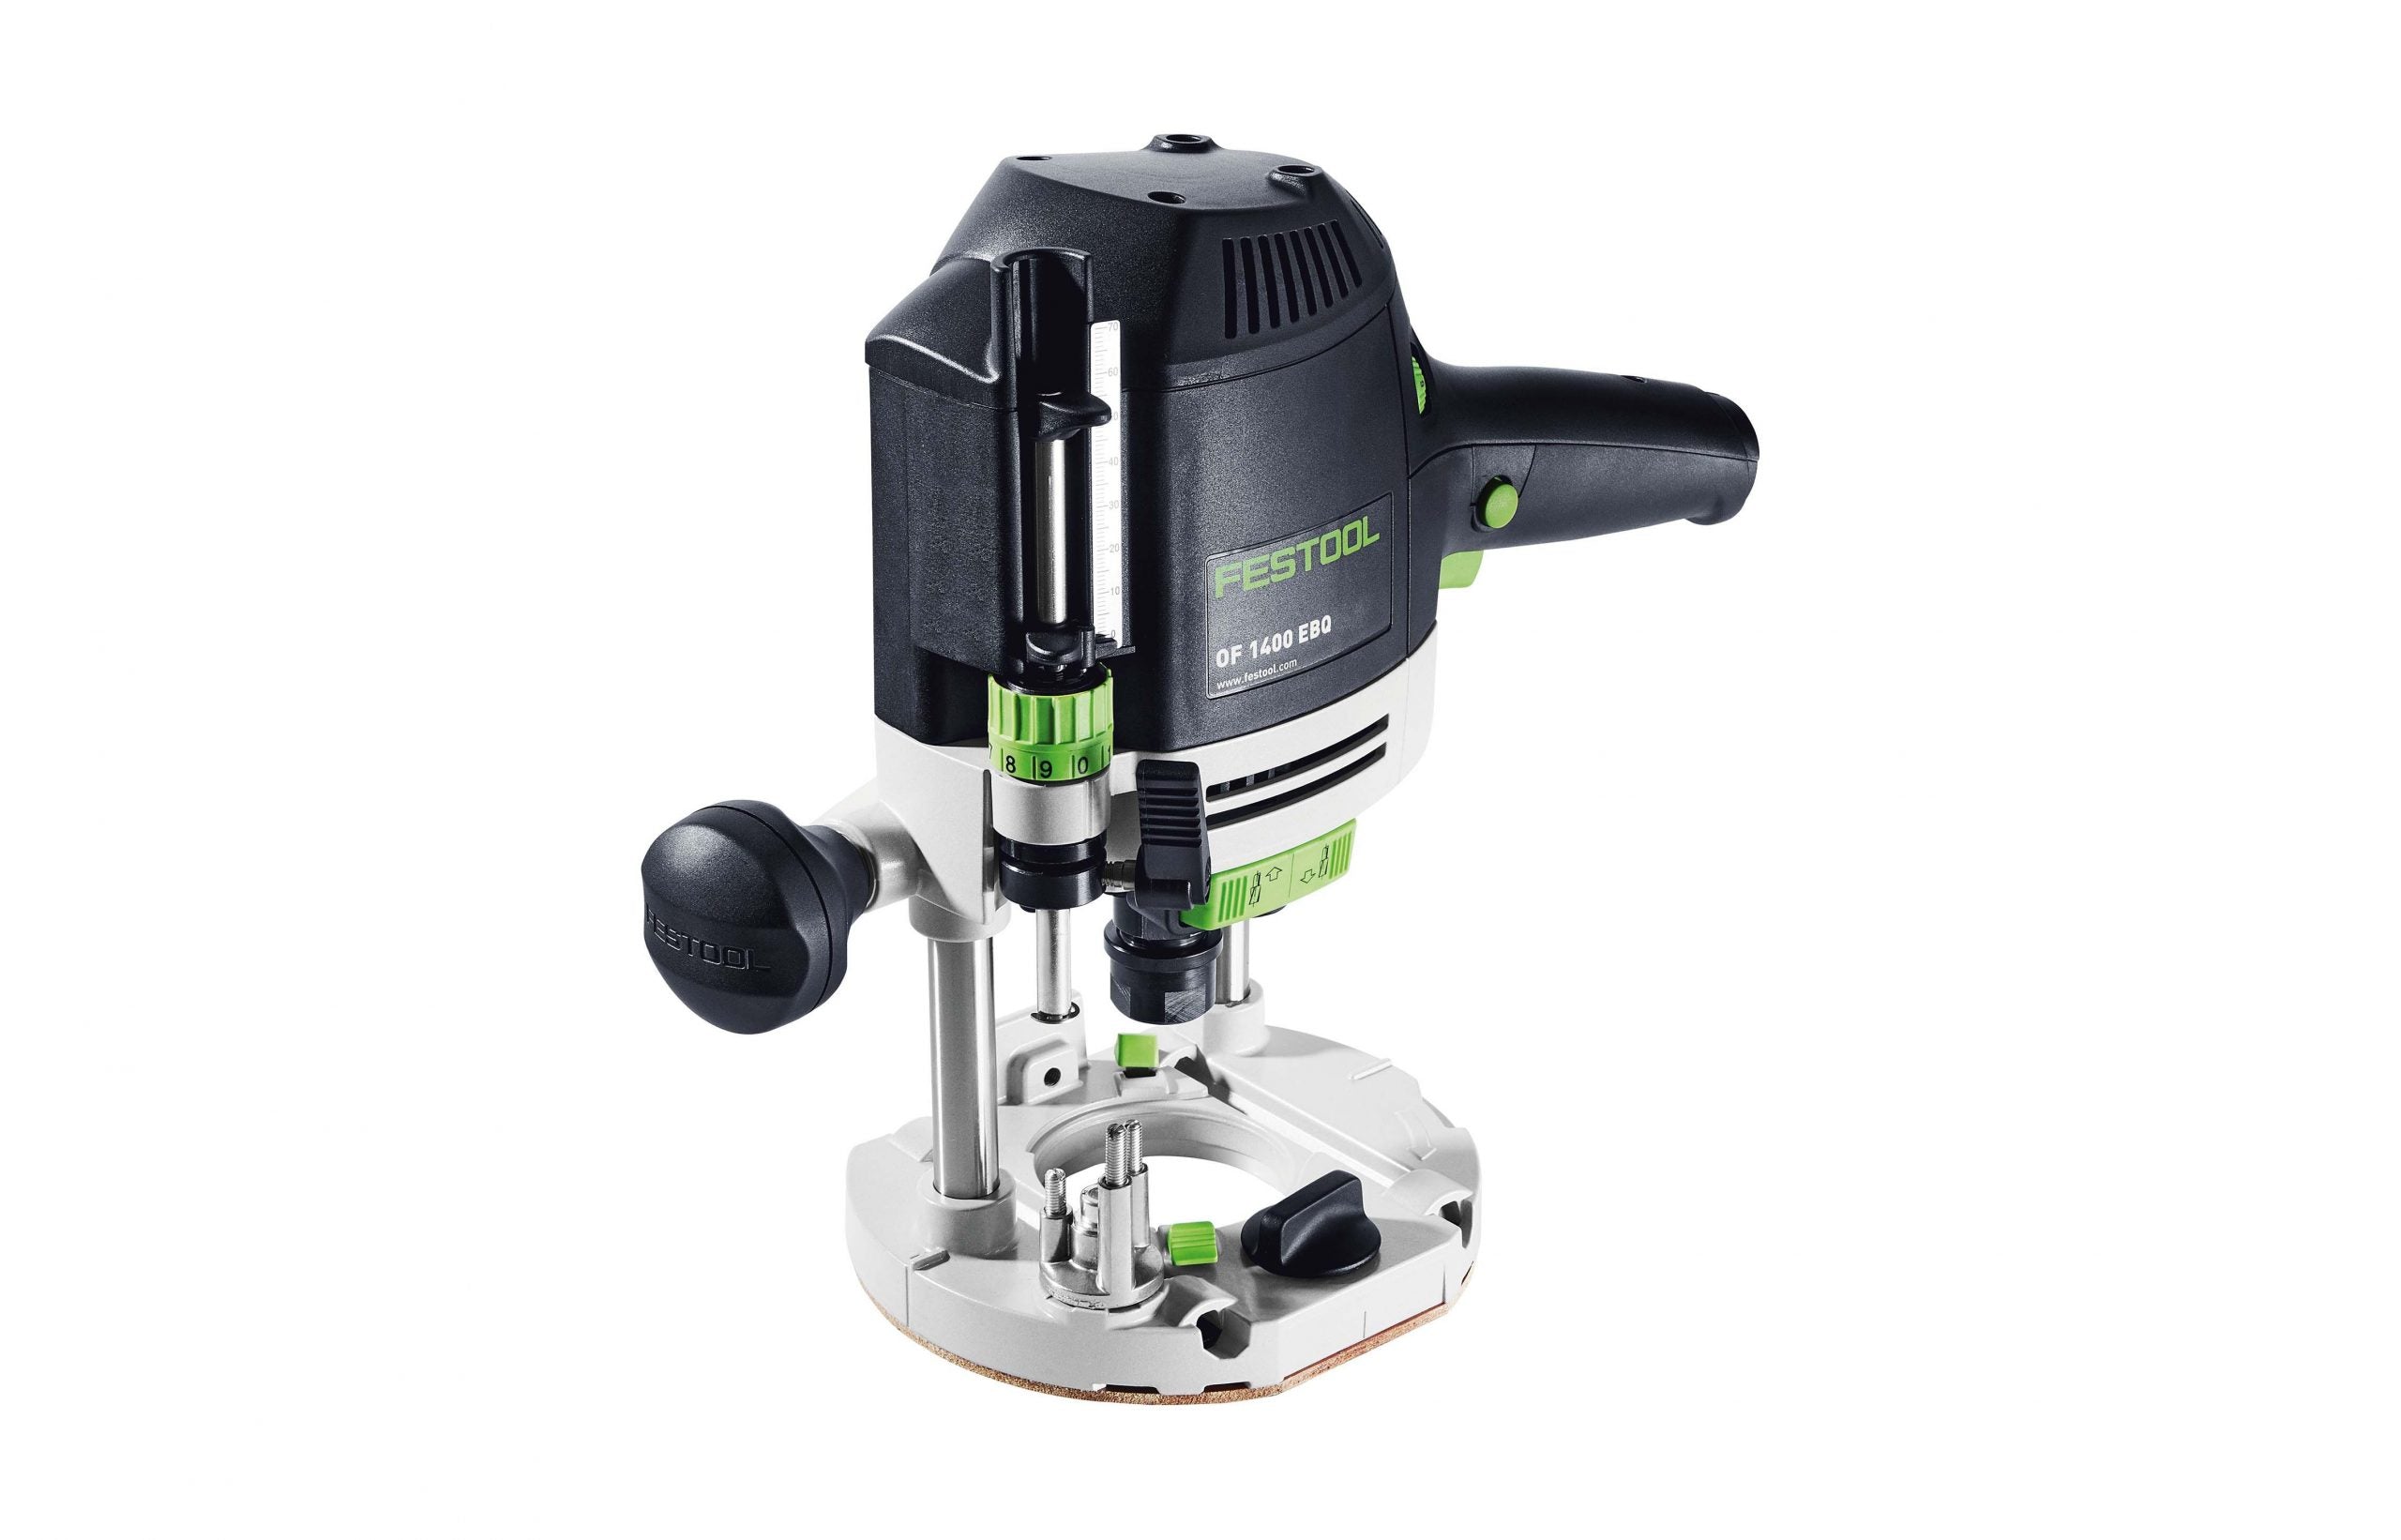 1400W 70mm Plunge Router in Systainer 1400 EBQ-Plus 576211 by Festool